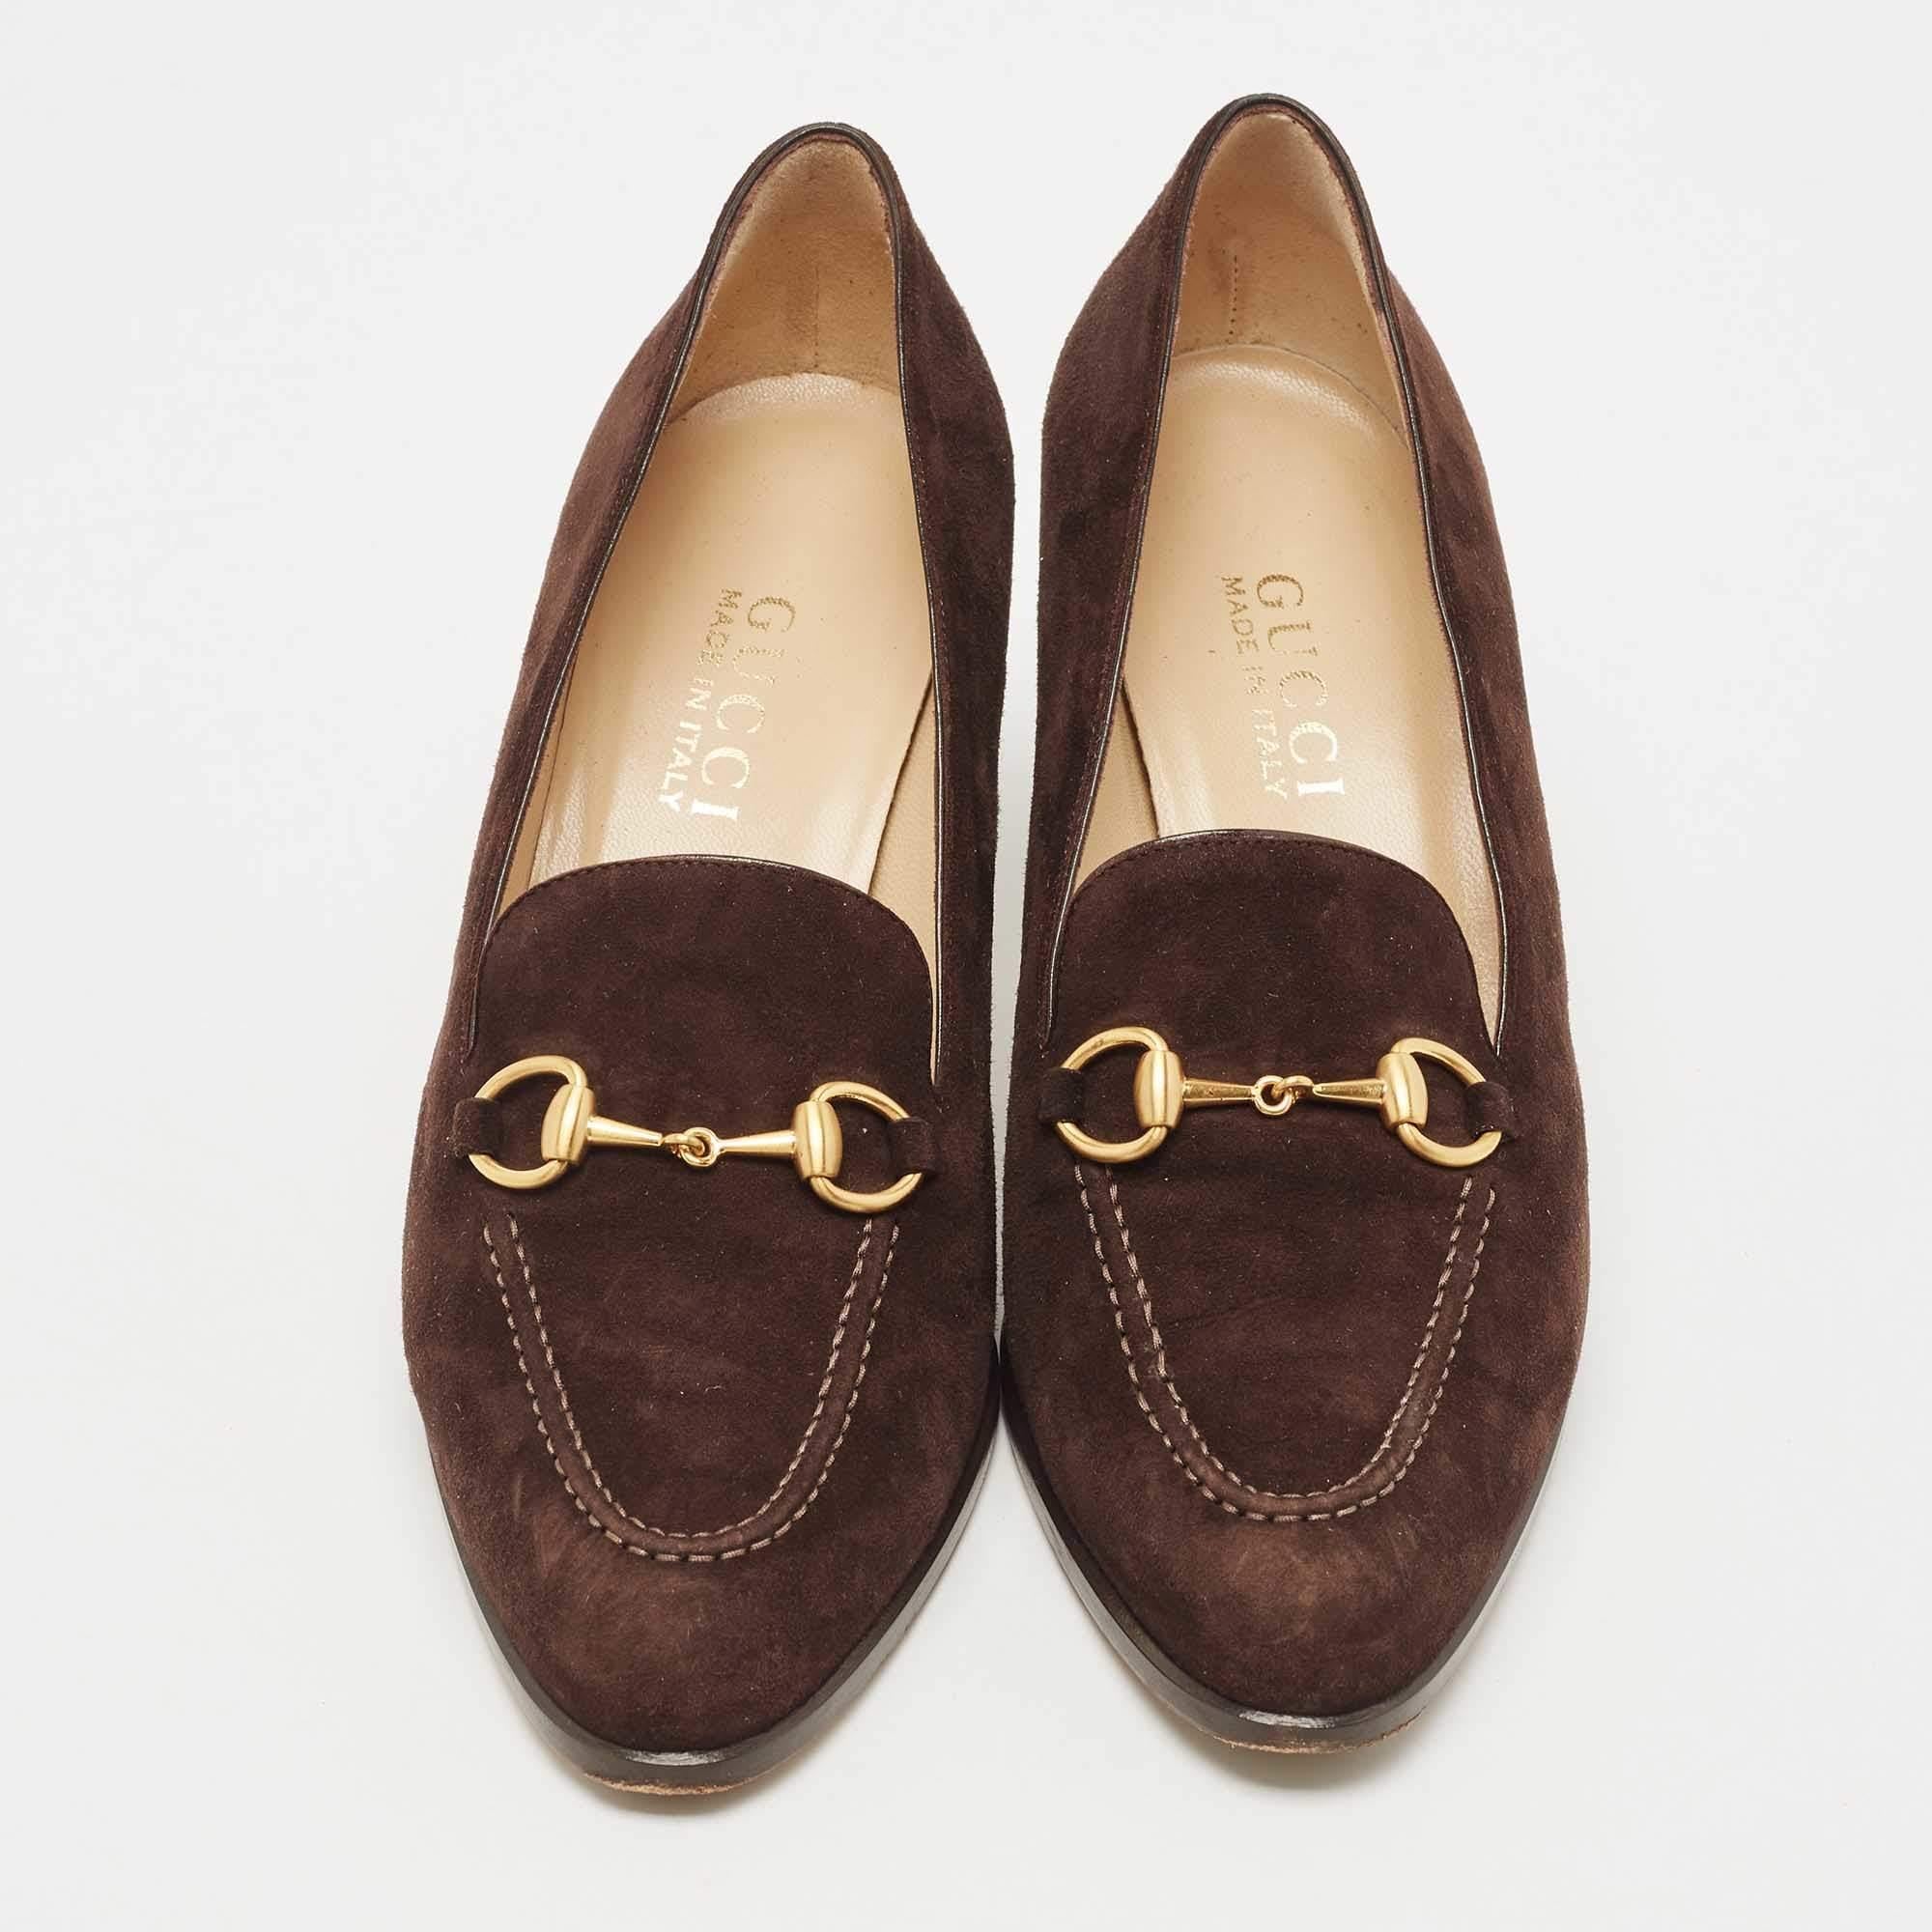 Gucci Brown Suede Loafer Pumps Size 37.5 1